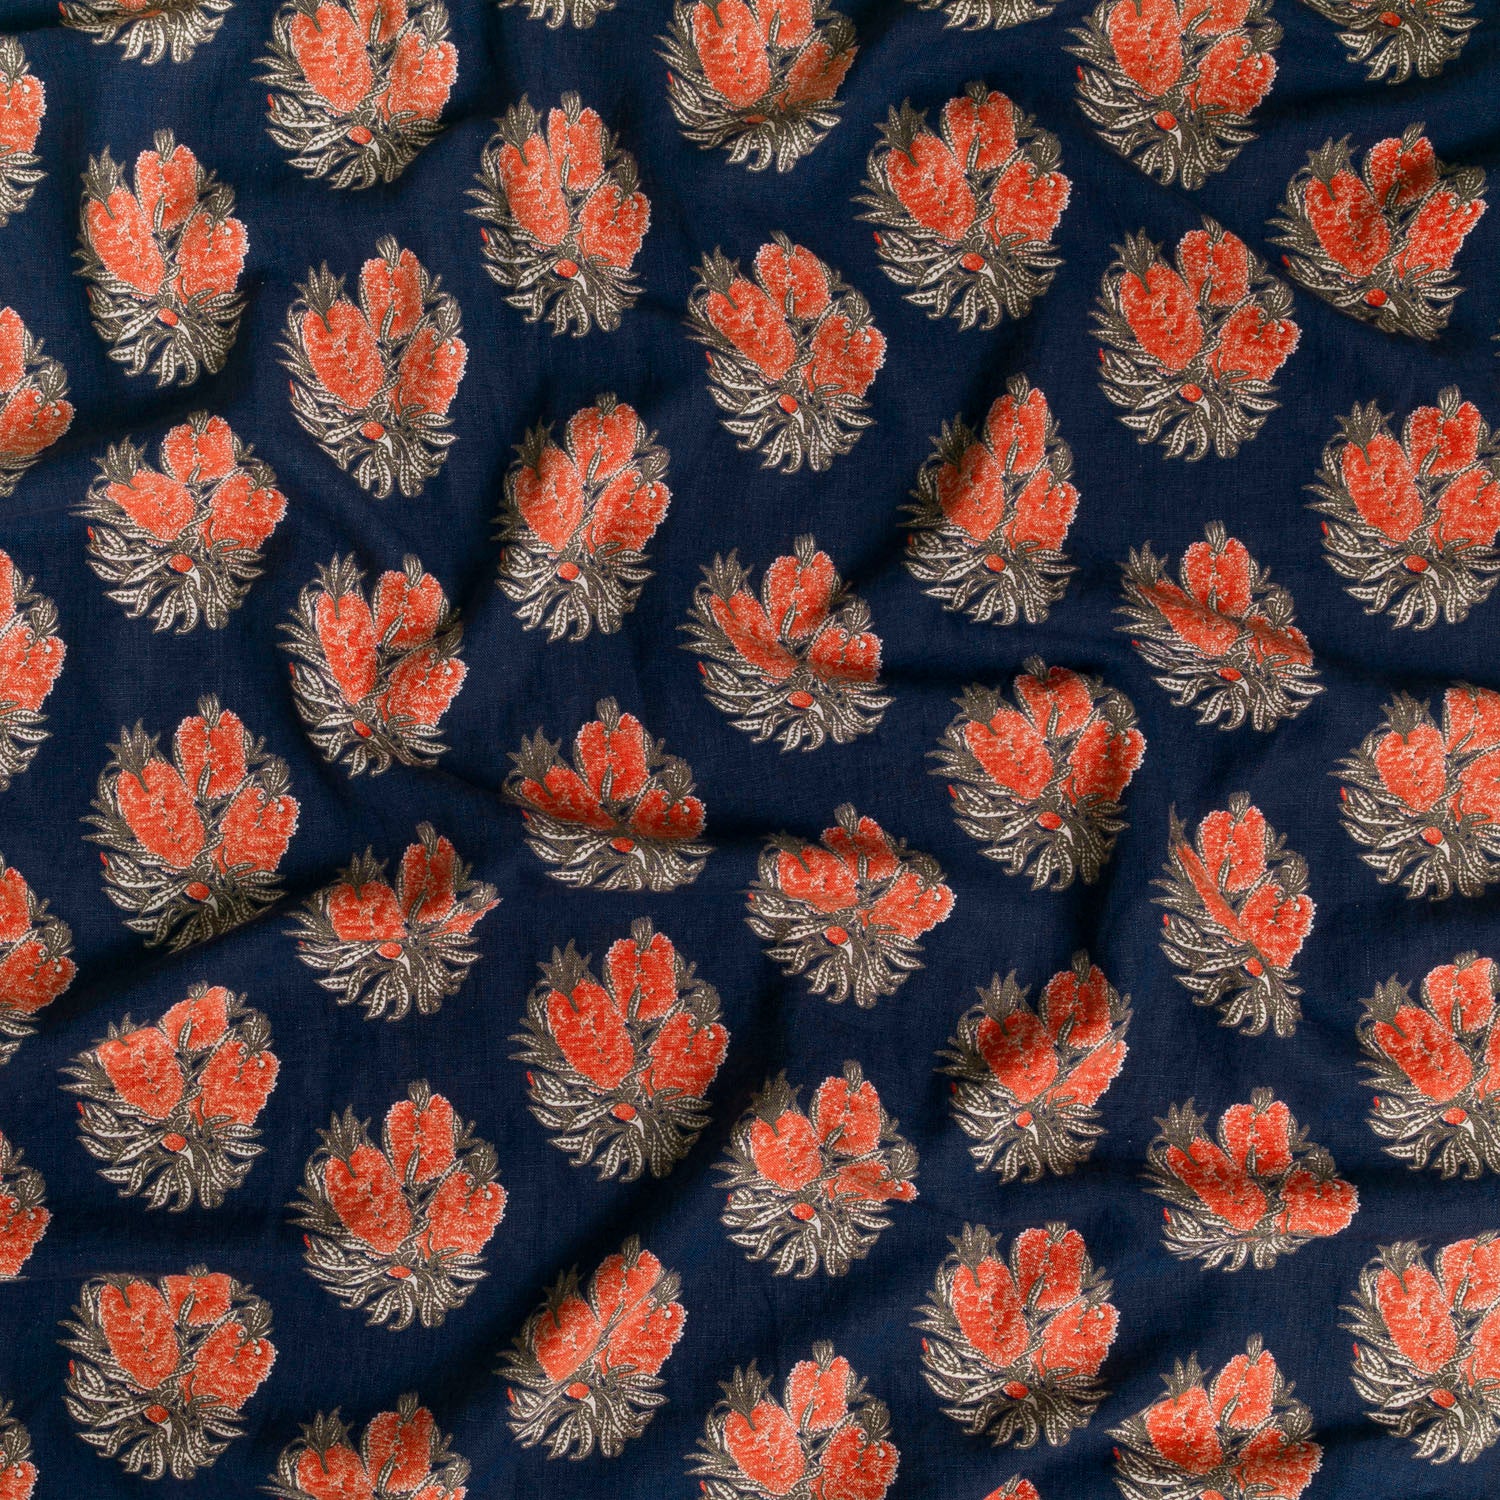 Draped fabric in a floral cameo print in tan and red on a navy field.